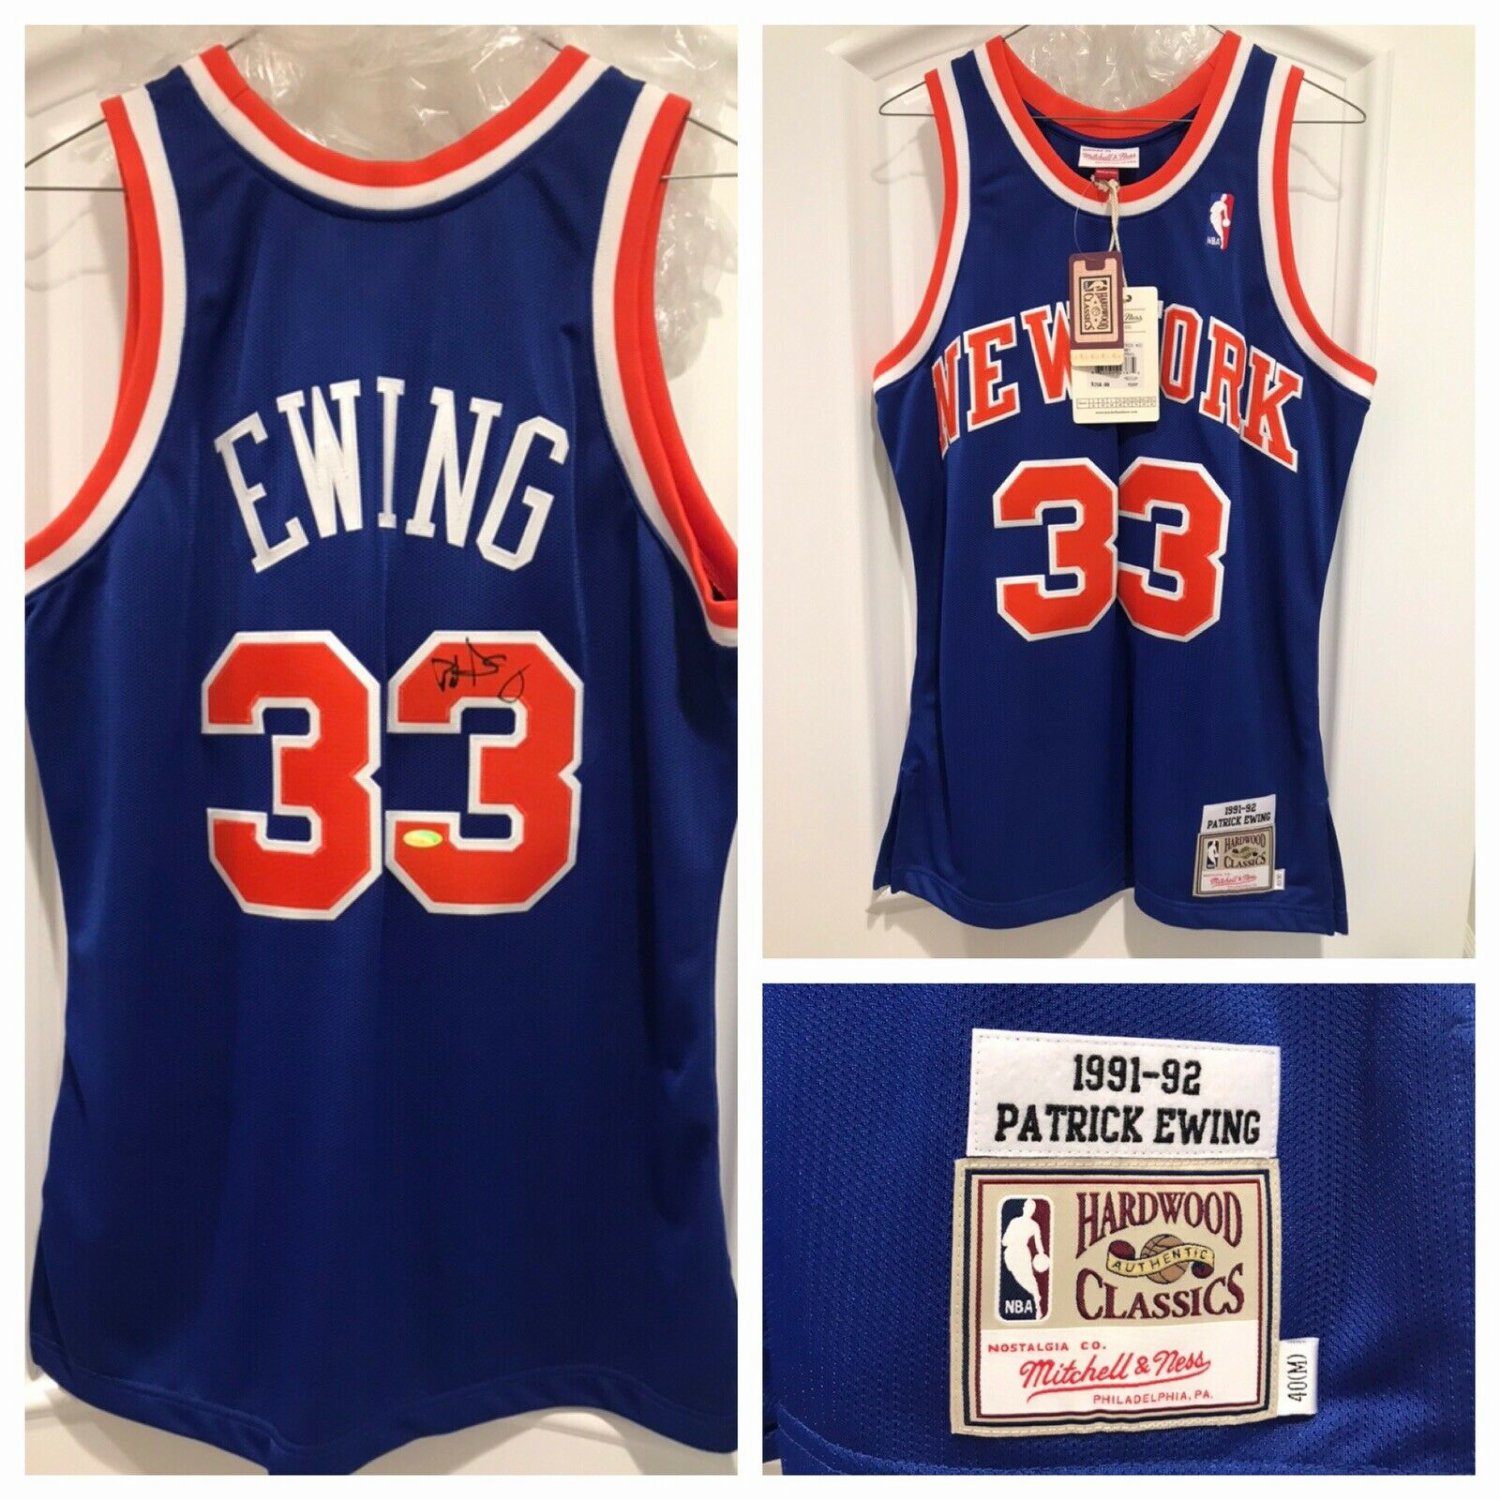 Patrick Ewing Autographed Signed Signed Knicks Authentic Jersey (Steiner)